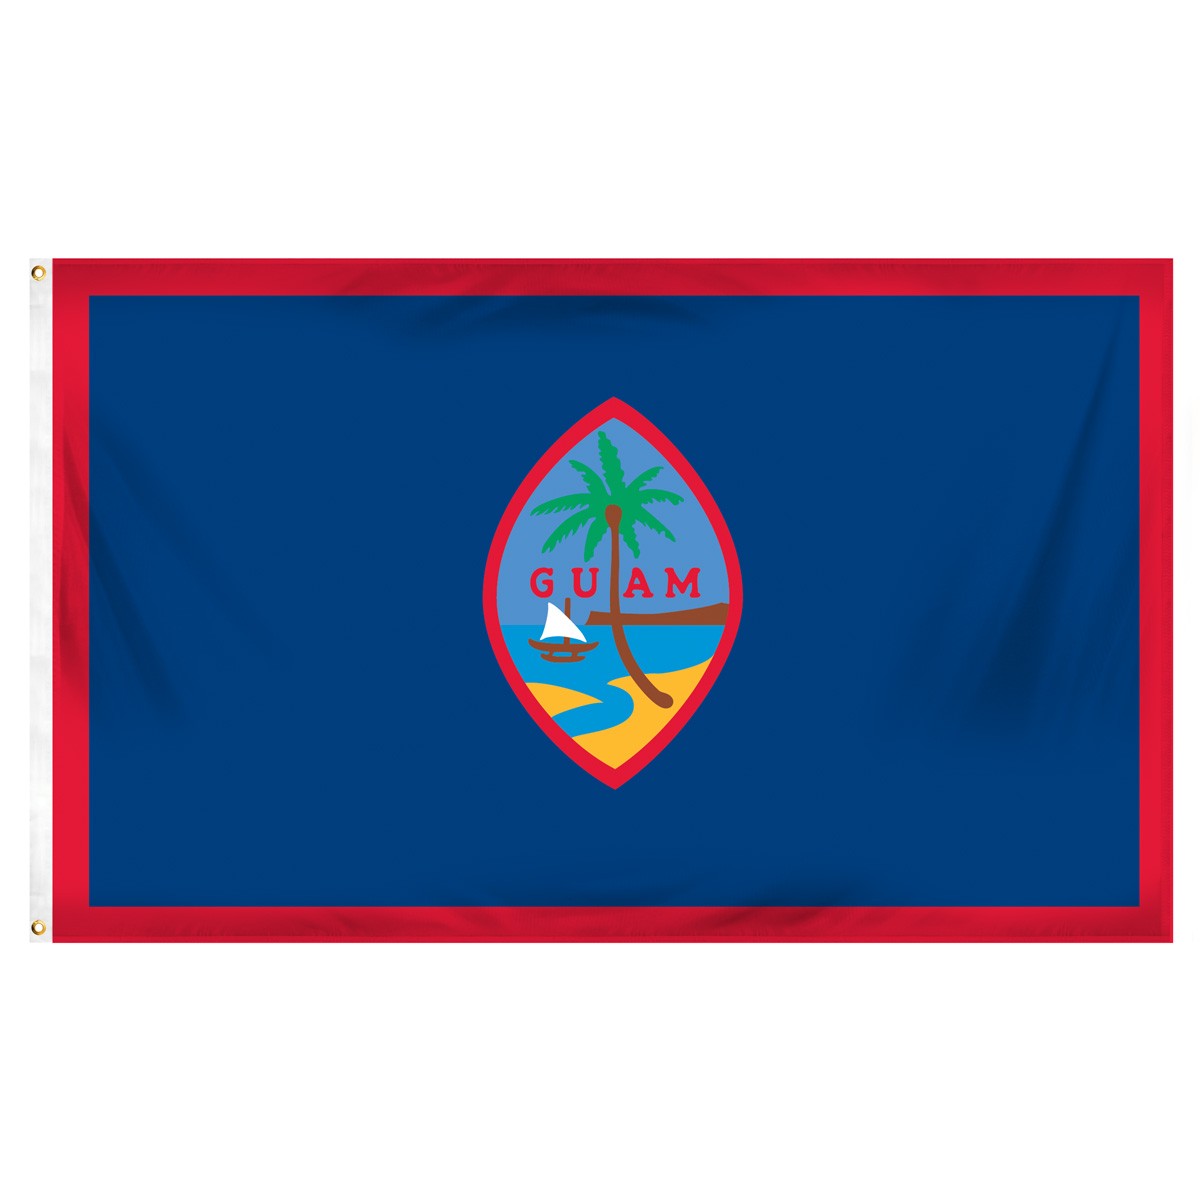 Guam Rope Pennants and Flags